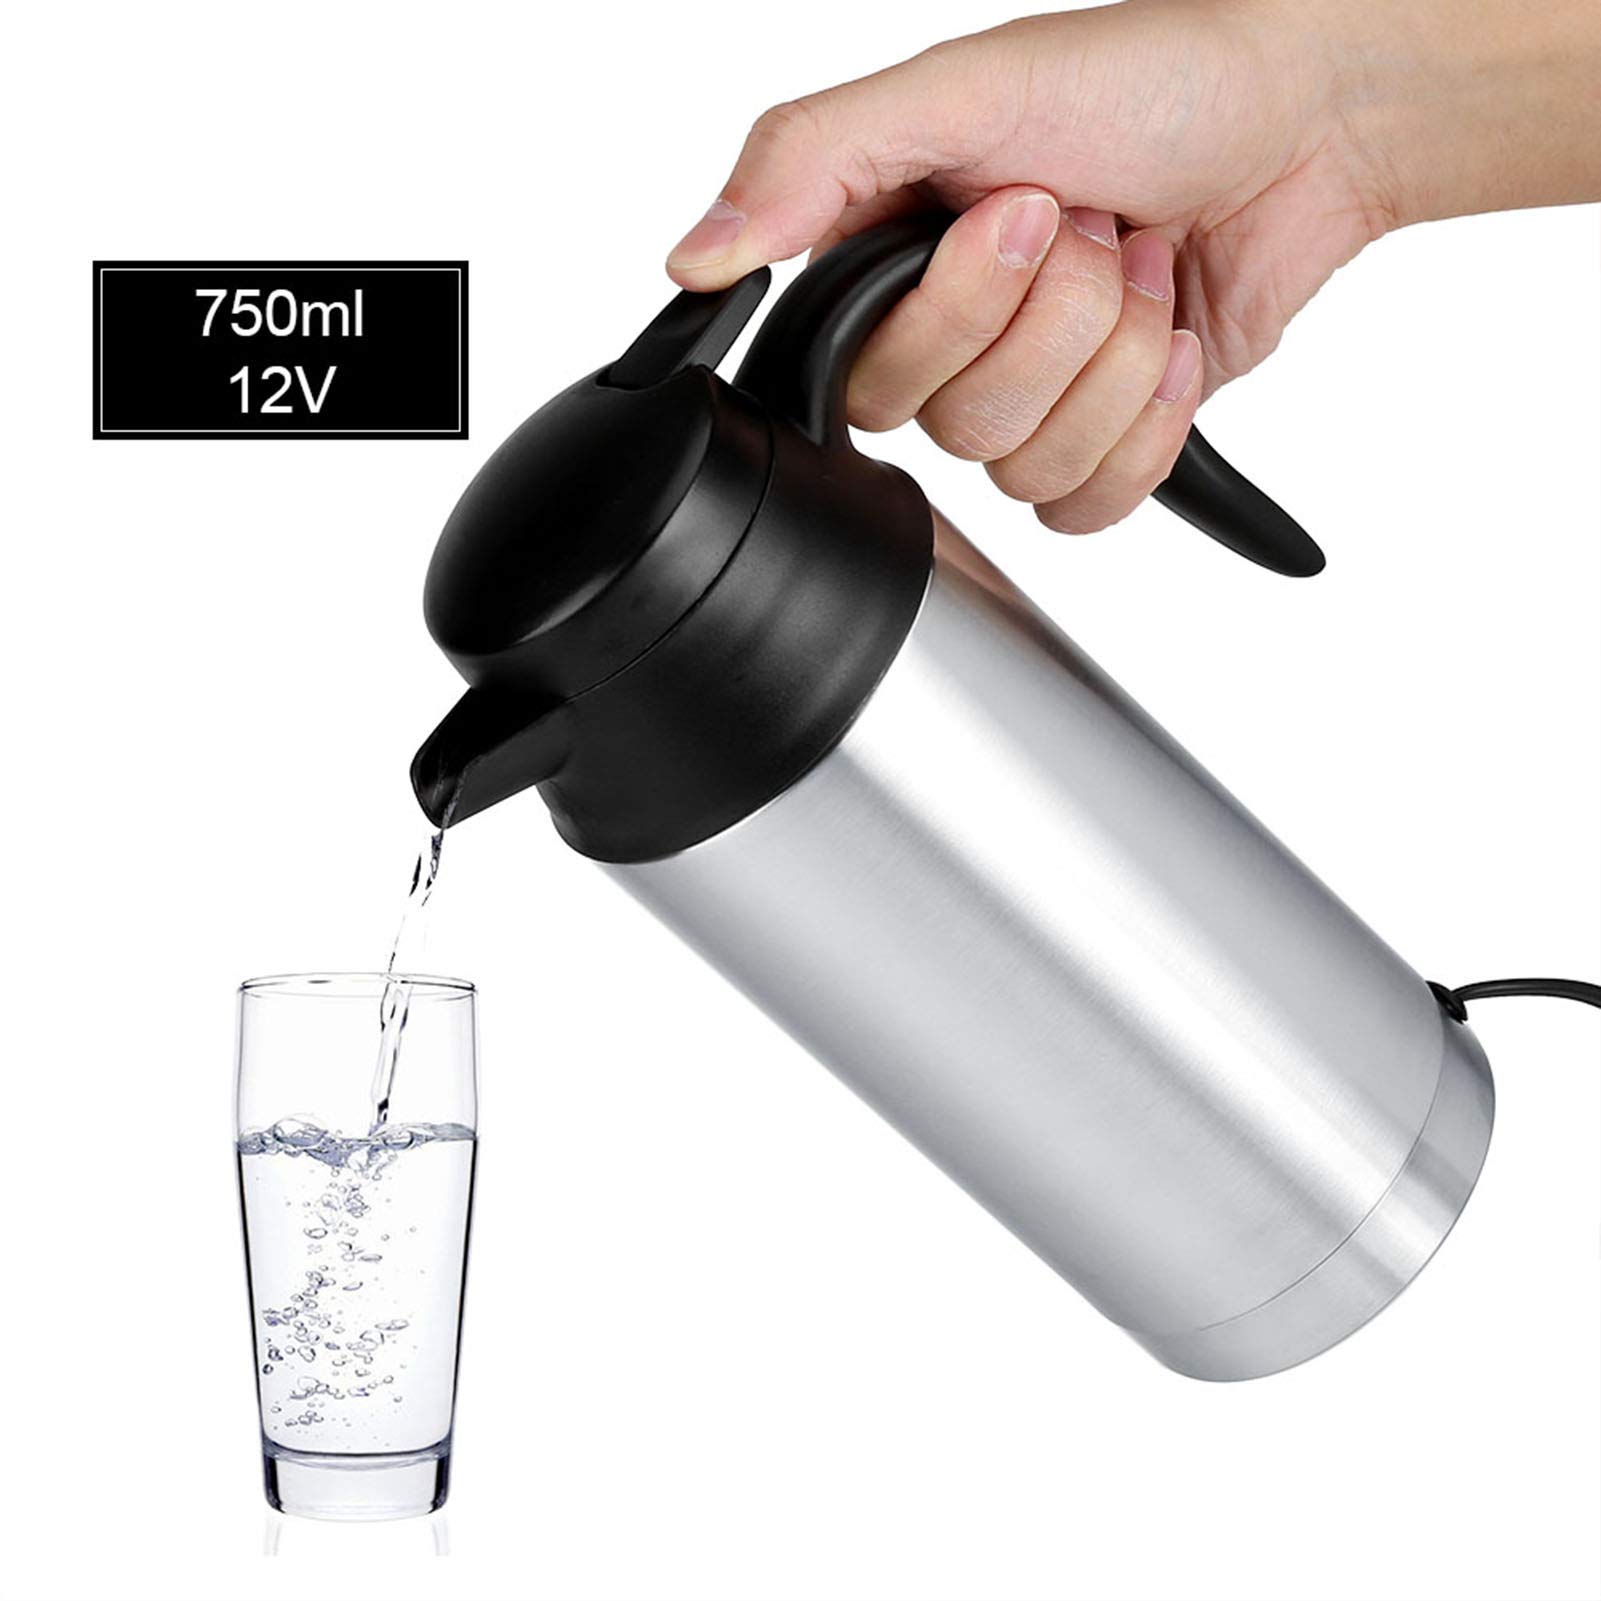 12V 750ml Stainless Steel Car Electric Heating Mug Drinking Cup Travel Kettle Water Boiler for Water Tea Coffee Milk